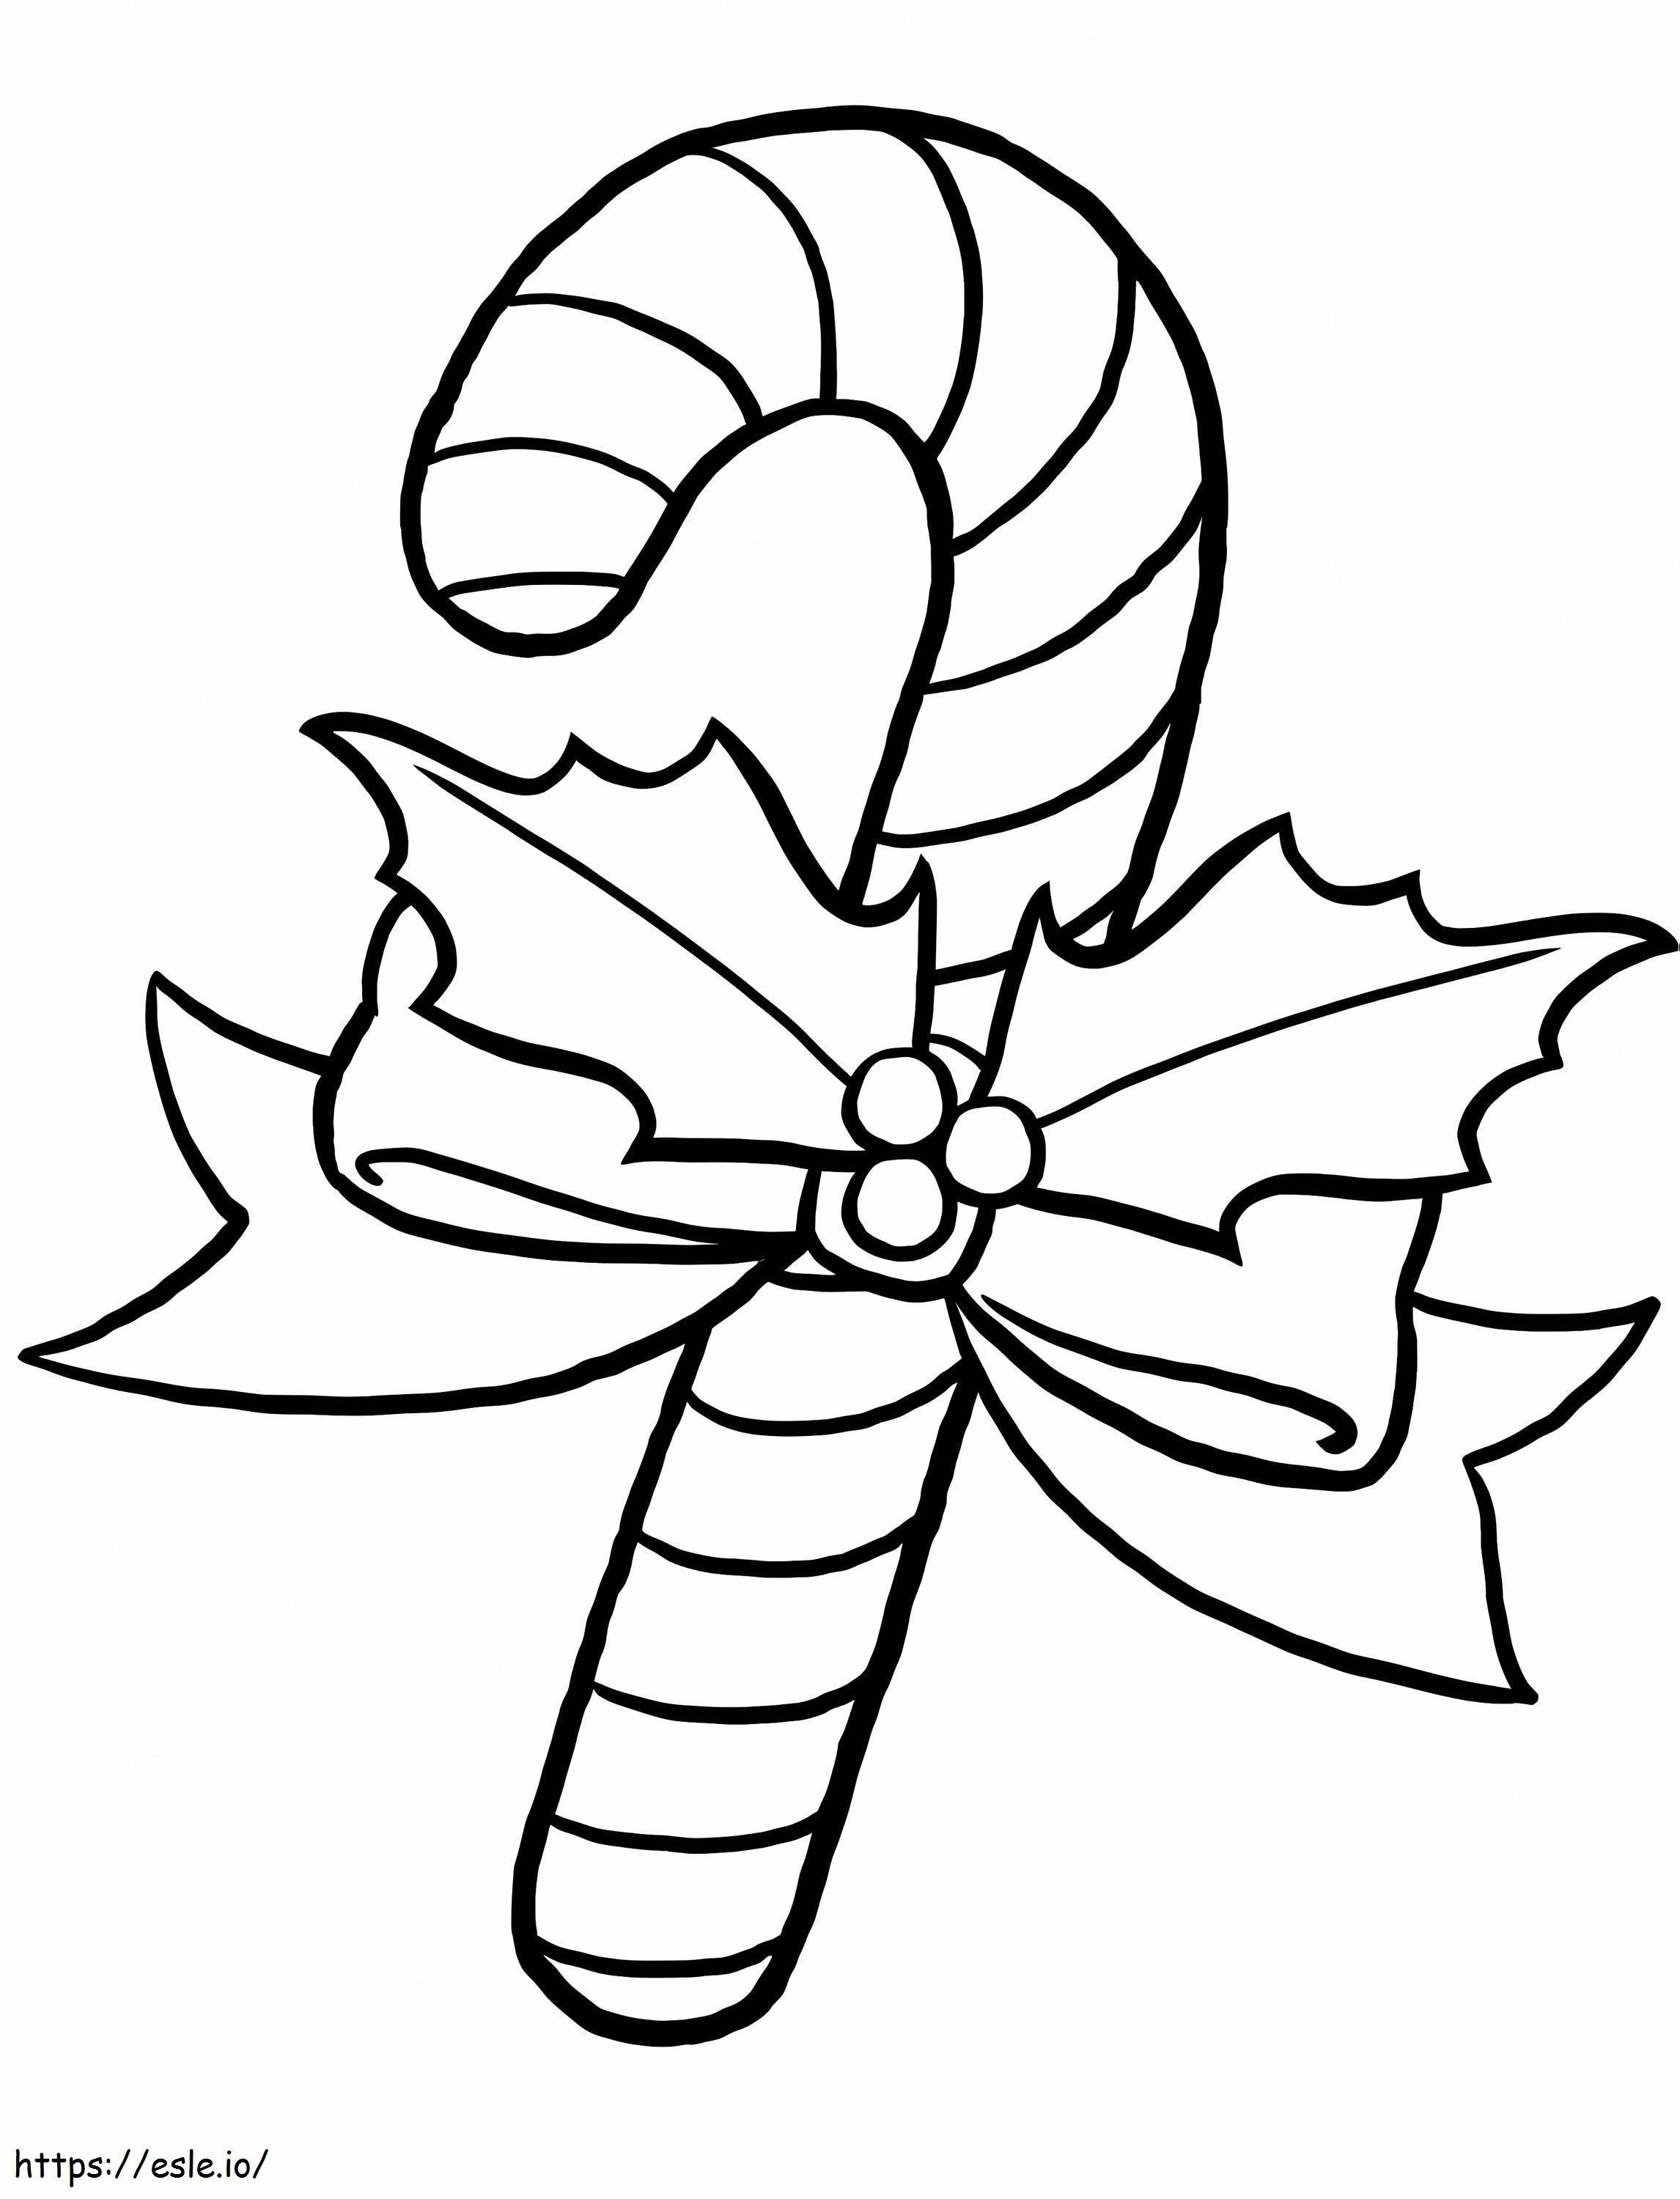 Candy Cane 2 coloring page